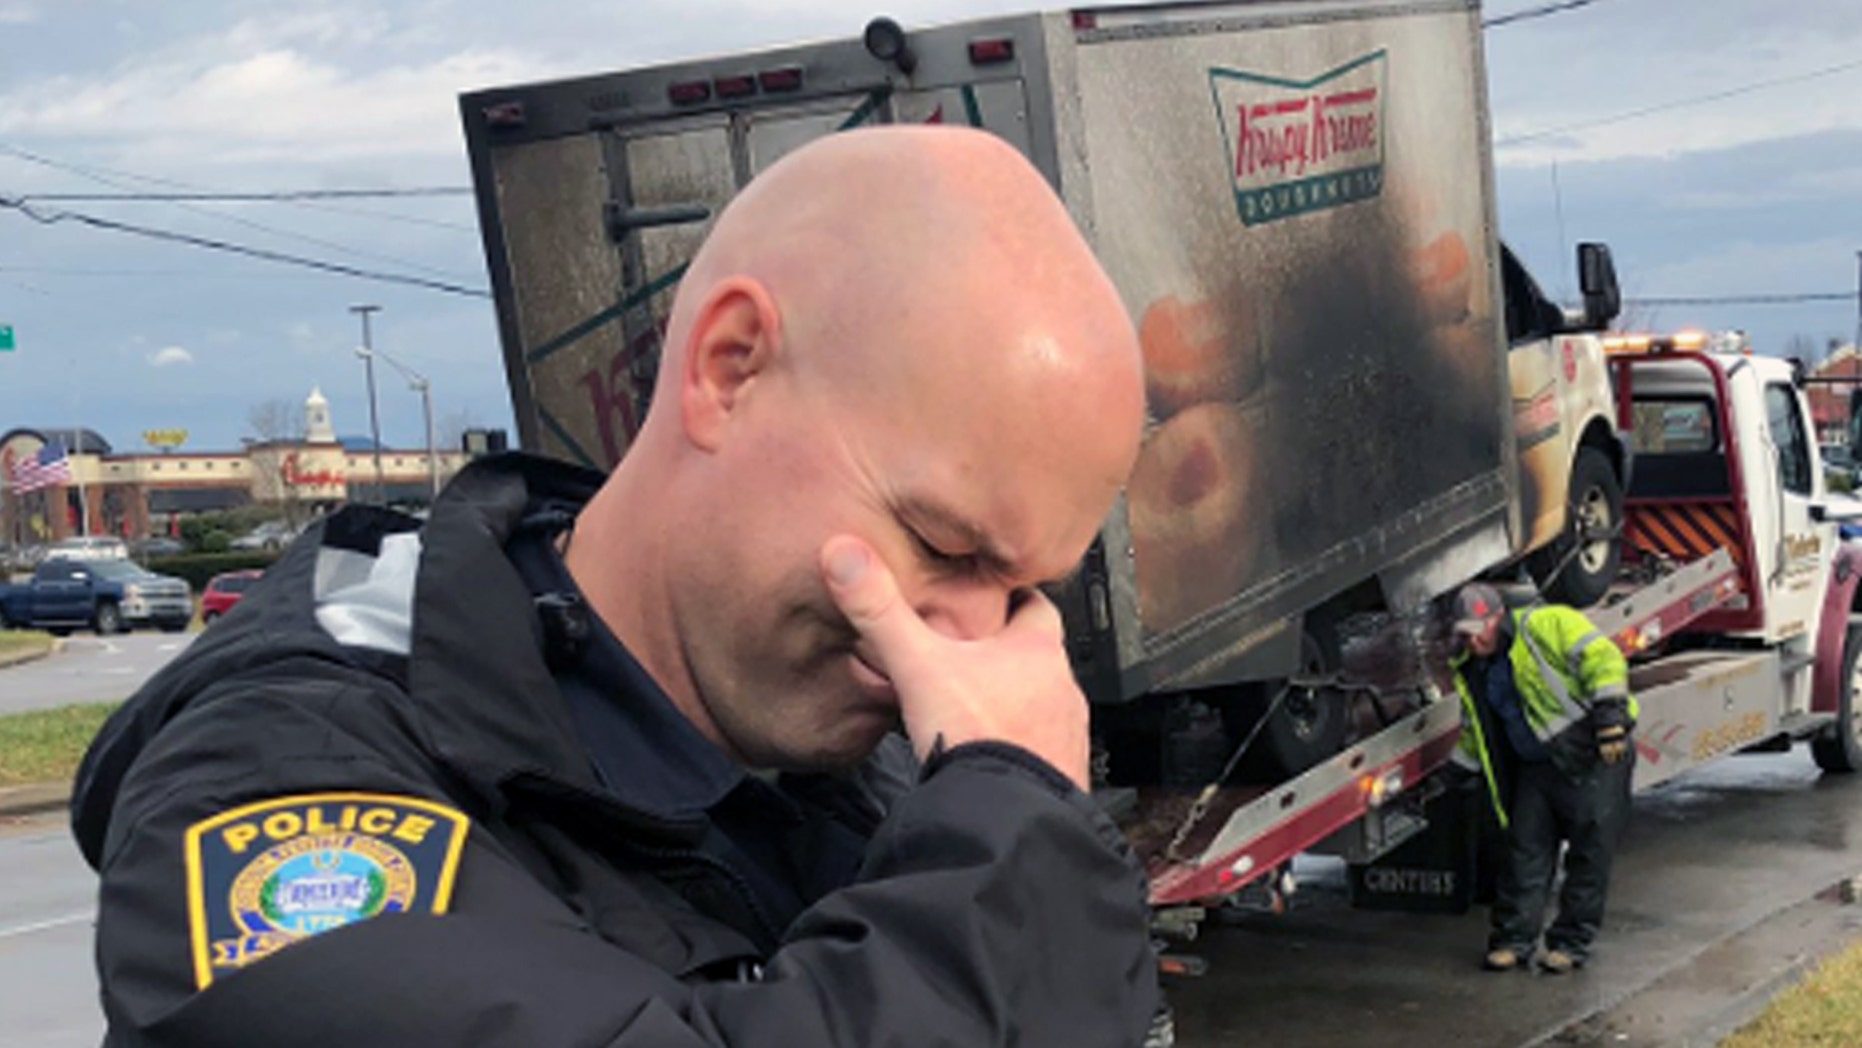 Lexington Police officers in Kentucky went viral for their response to a Krispy Kreme Doughnuts truck fire destroying the goods inside.